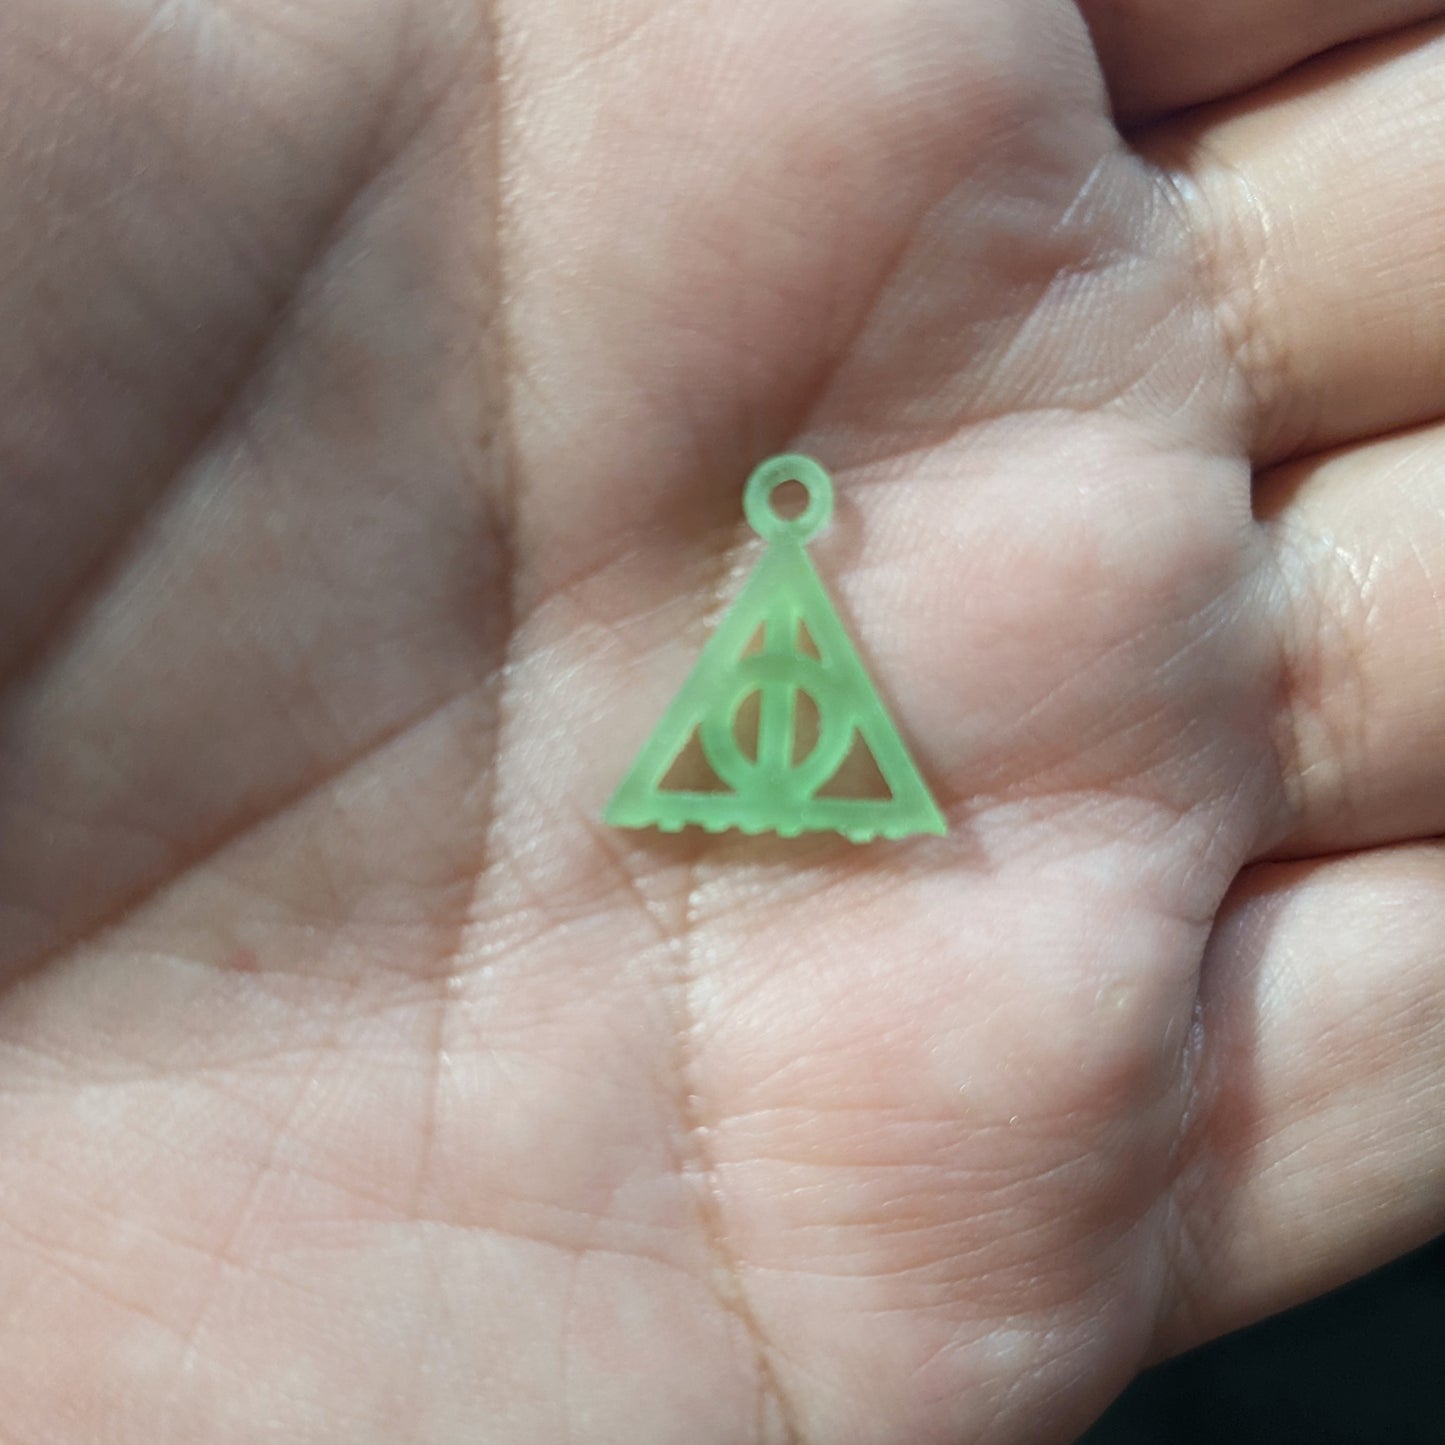 Gold Deathly Wizard Charm Pendant